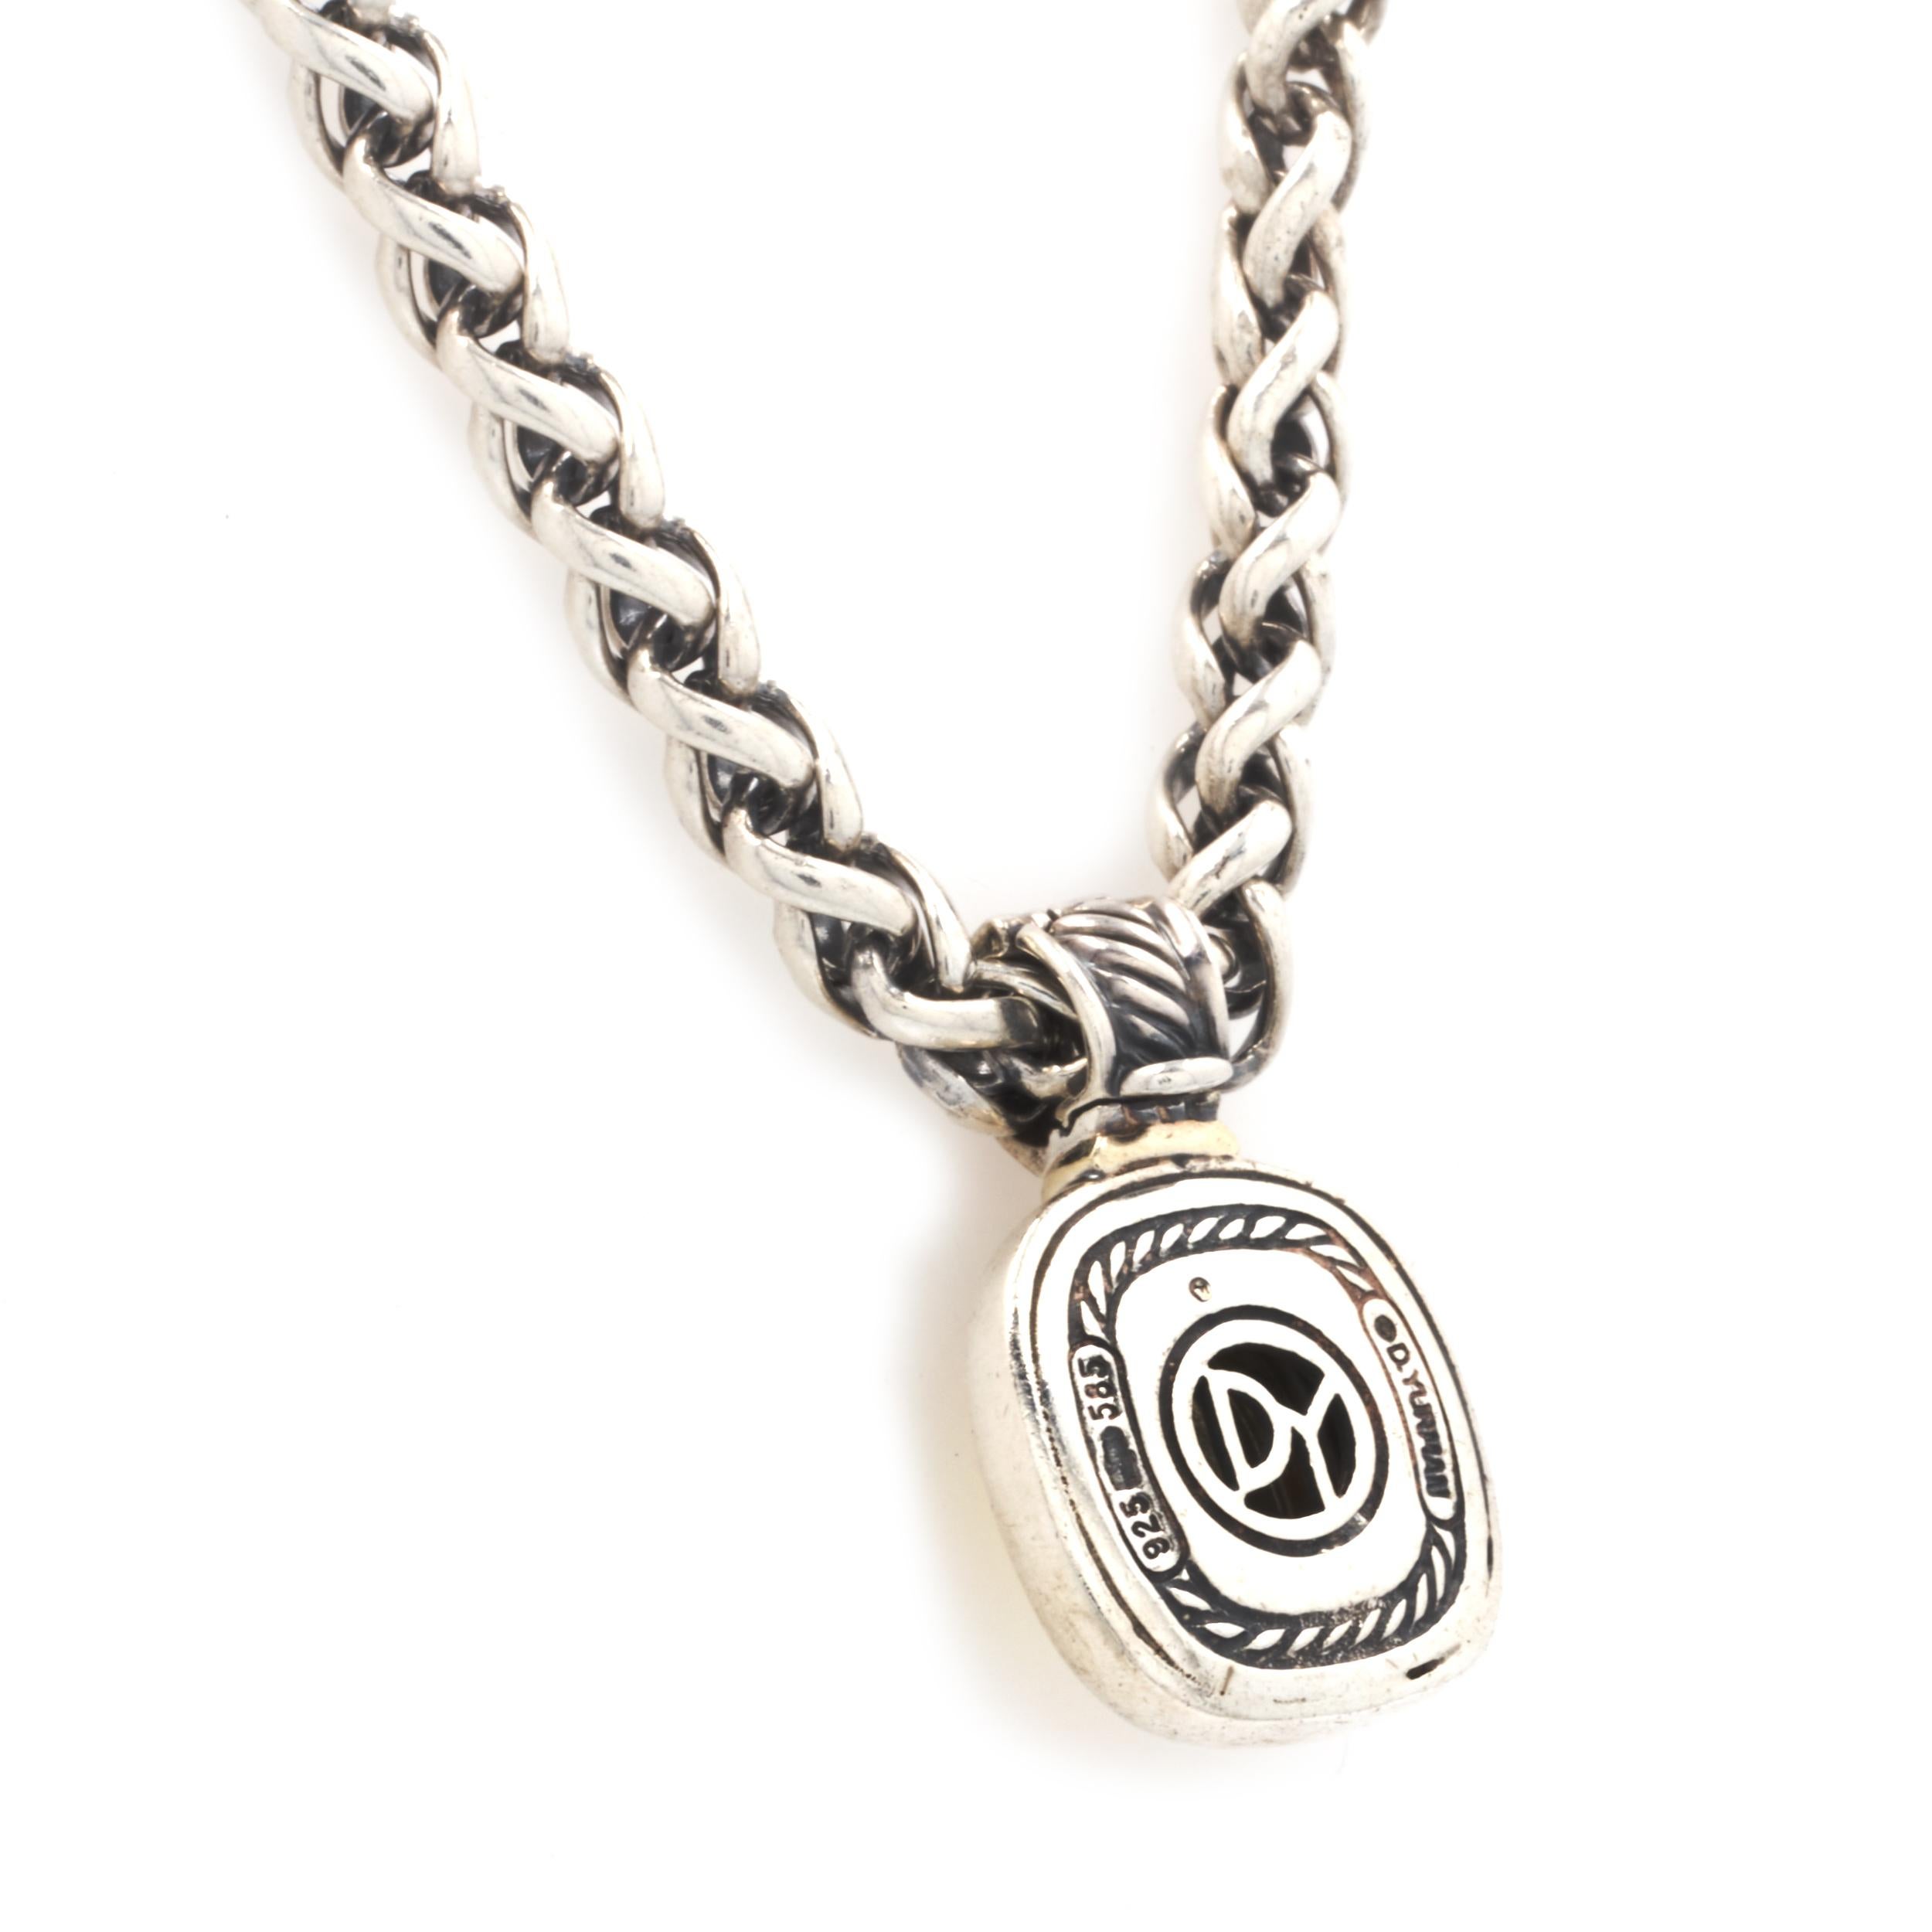 Designer: David Yurman
Material: sterling silver & 14K yellow gold
Weight: 63.57 grams
Measurement: necklace measures 18-inches in length
